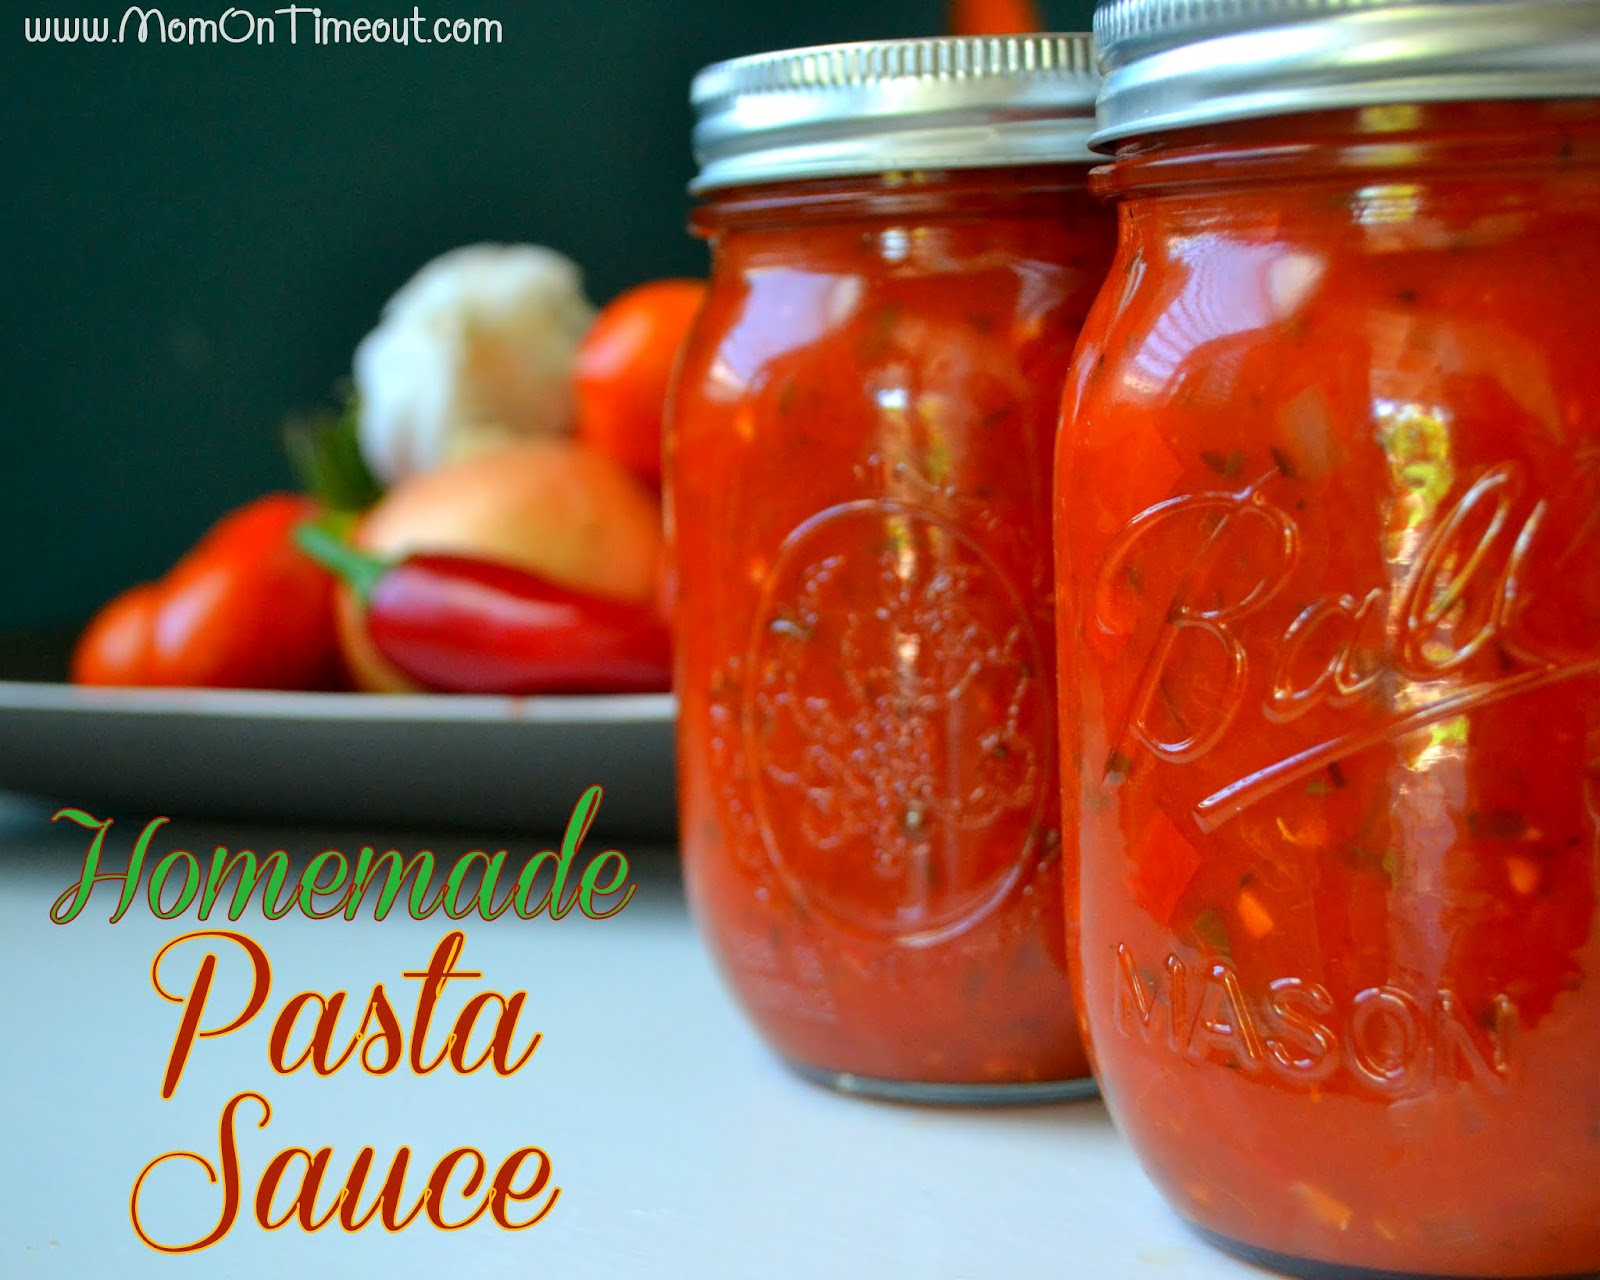 Homemade Spaghetti Sauce With Fresh Tomatoes For Canning
 Homemade Pasta Sauce Recipe Mom Timeout